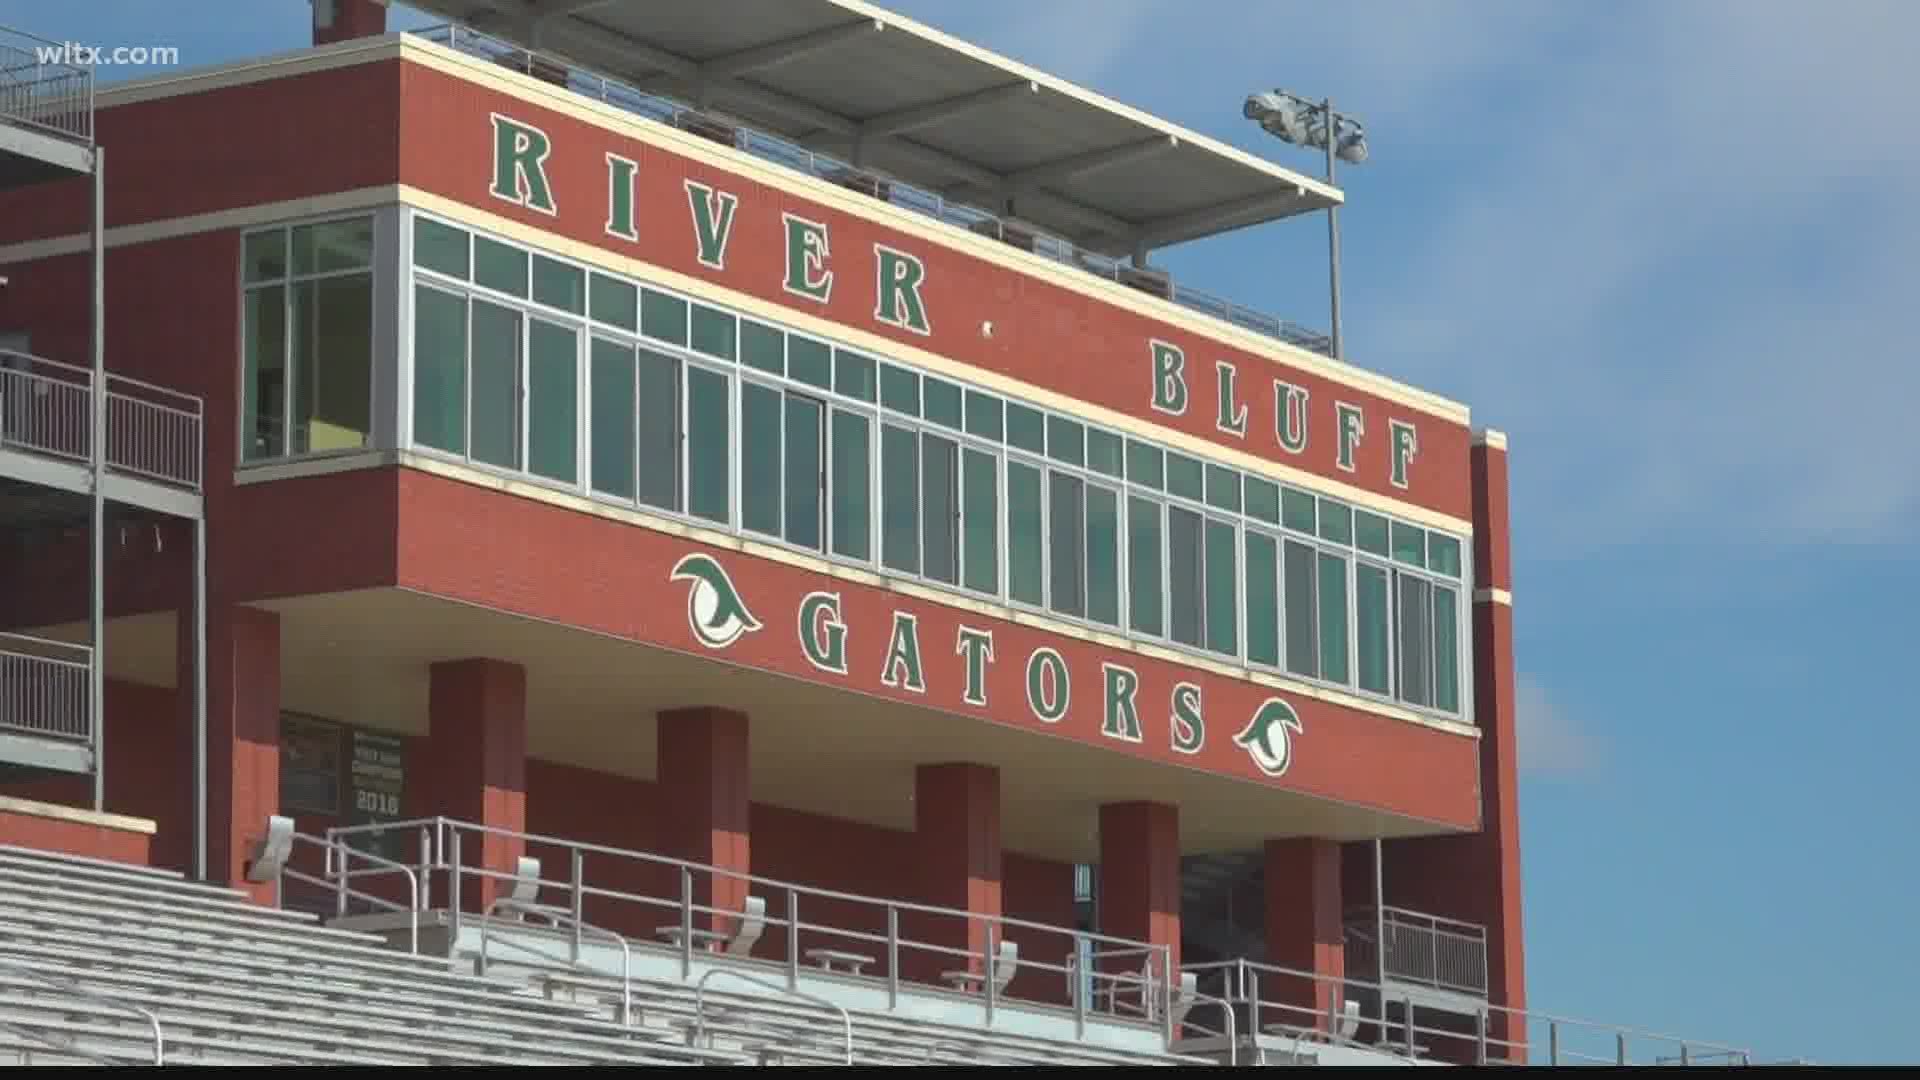 The postponements were made after three people associated with the River Bluff varsity program tested positive for COVID-19.